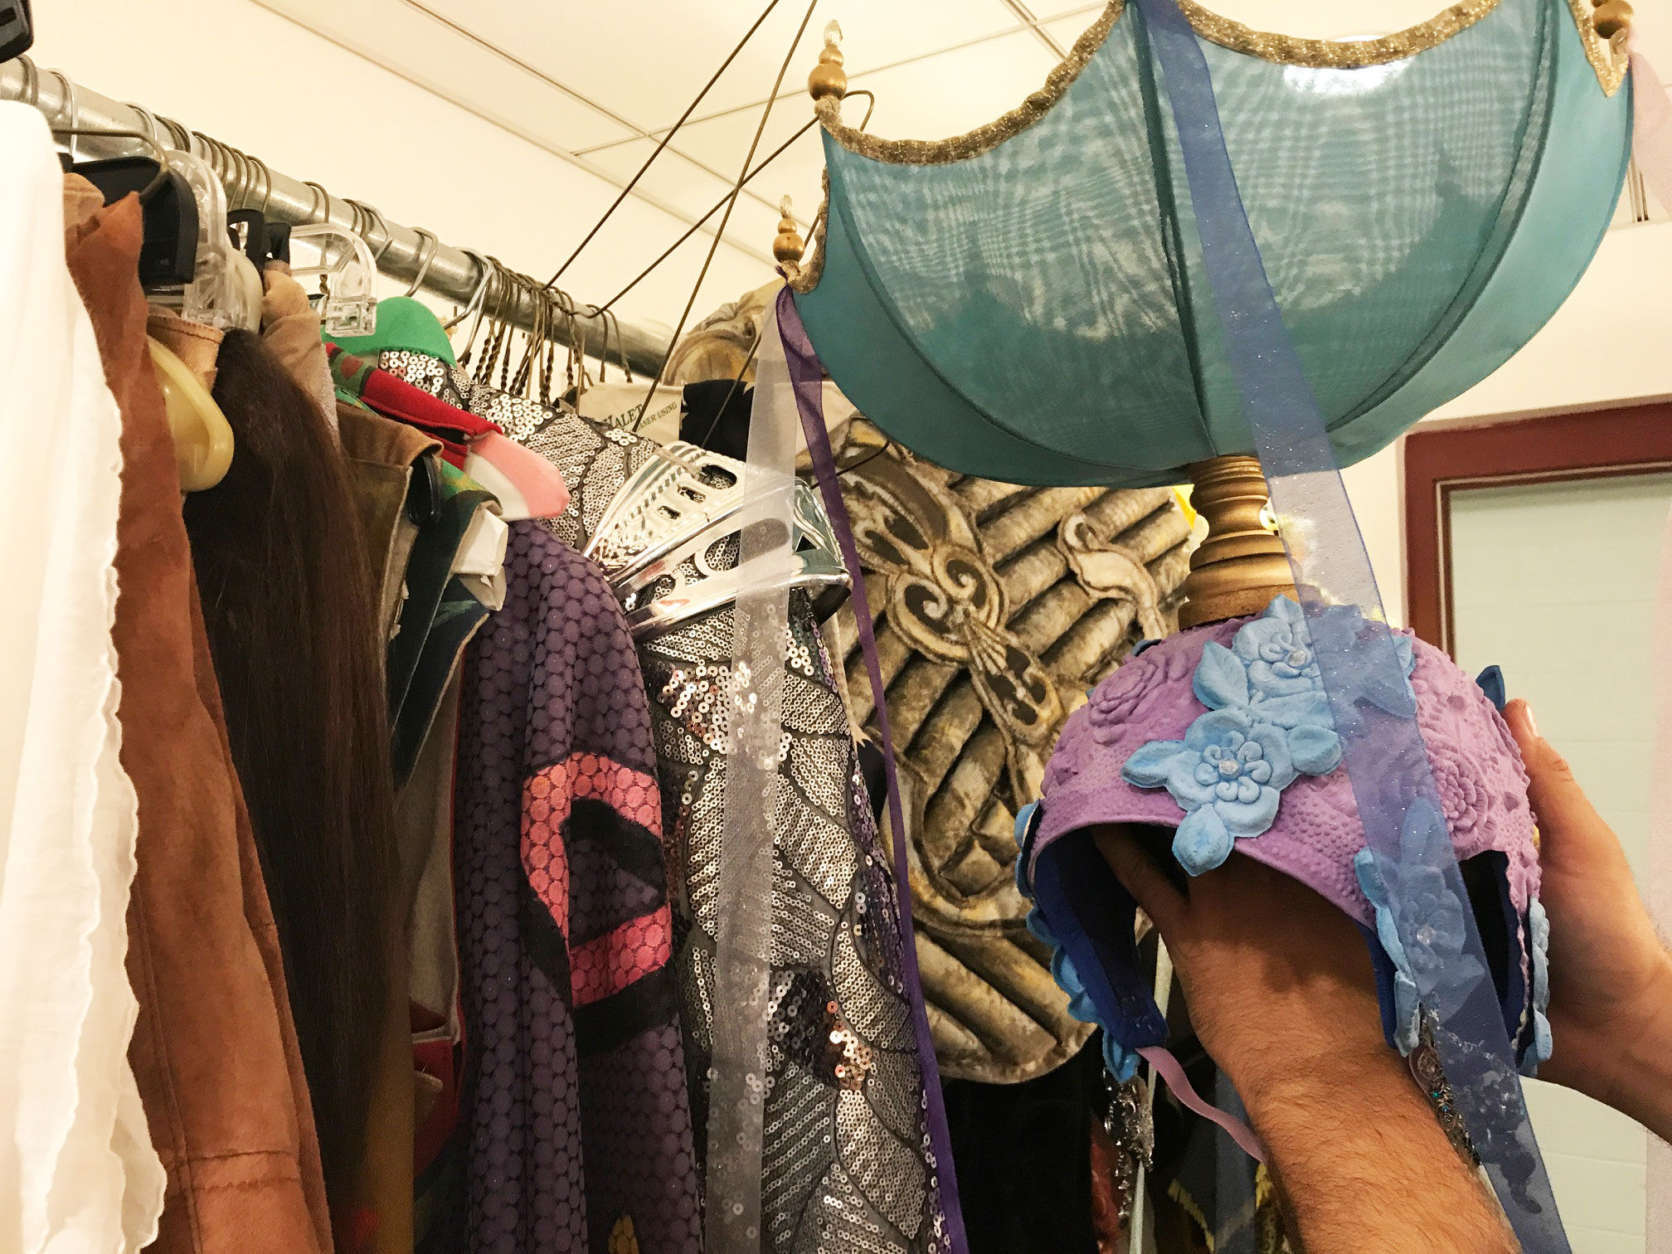 Everything from hats, to wigs, to period pieces and dresses will be available at the costume sale, and prices range from $2 to $200. (WTOP/Rachel Nania) 